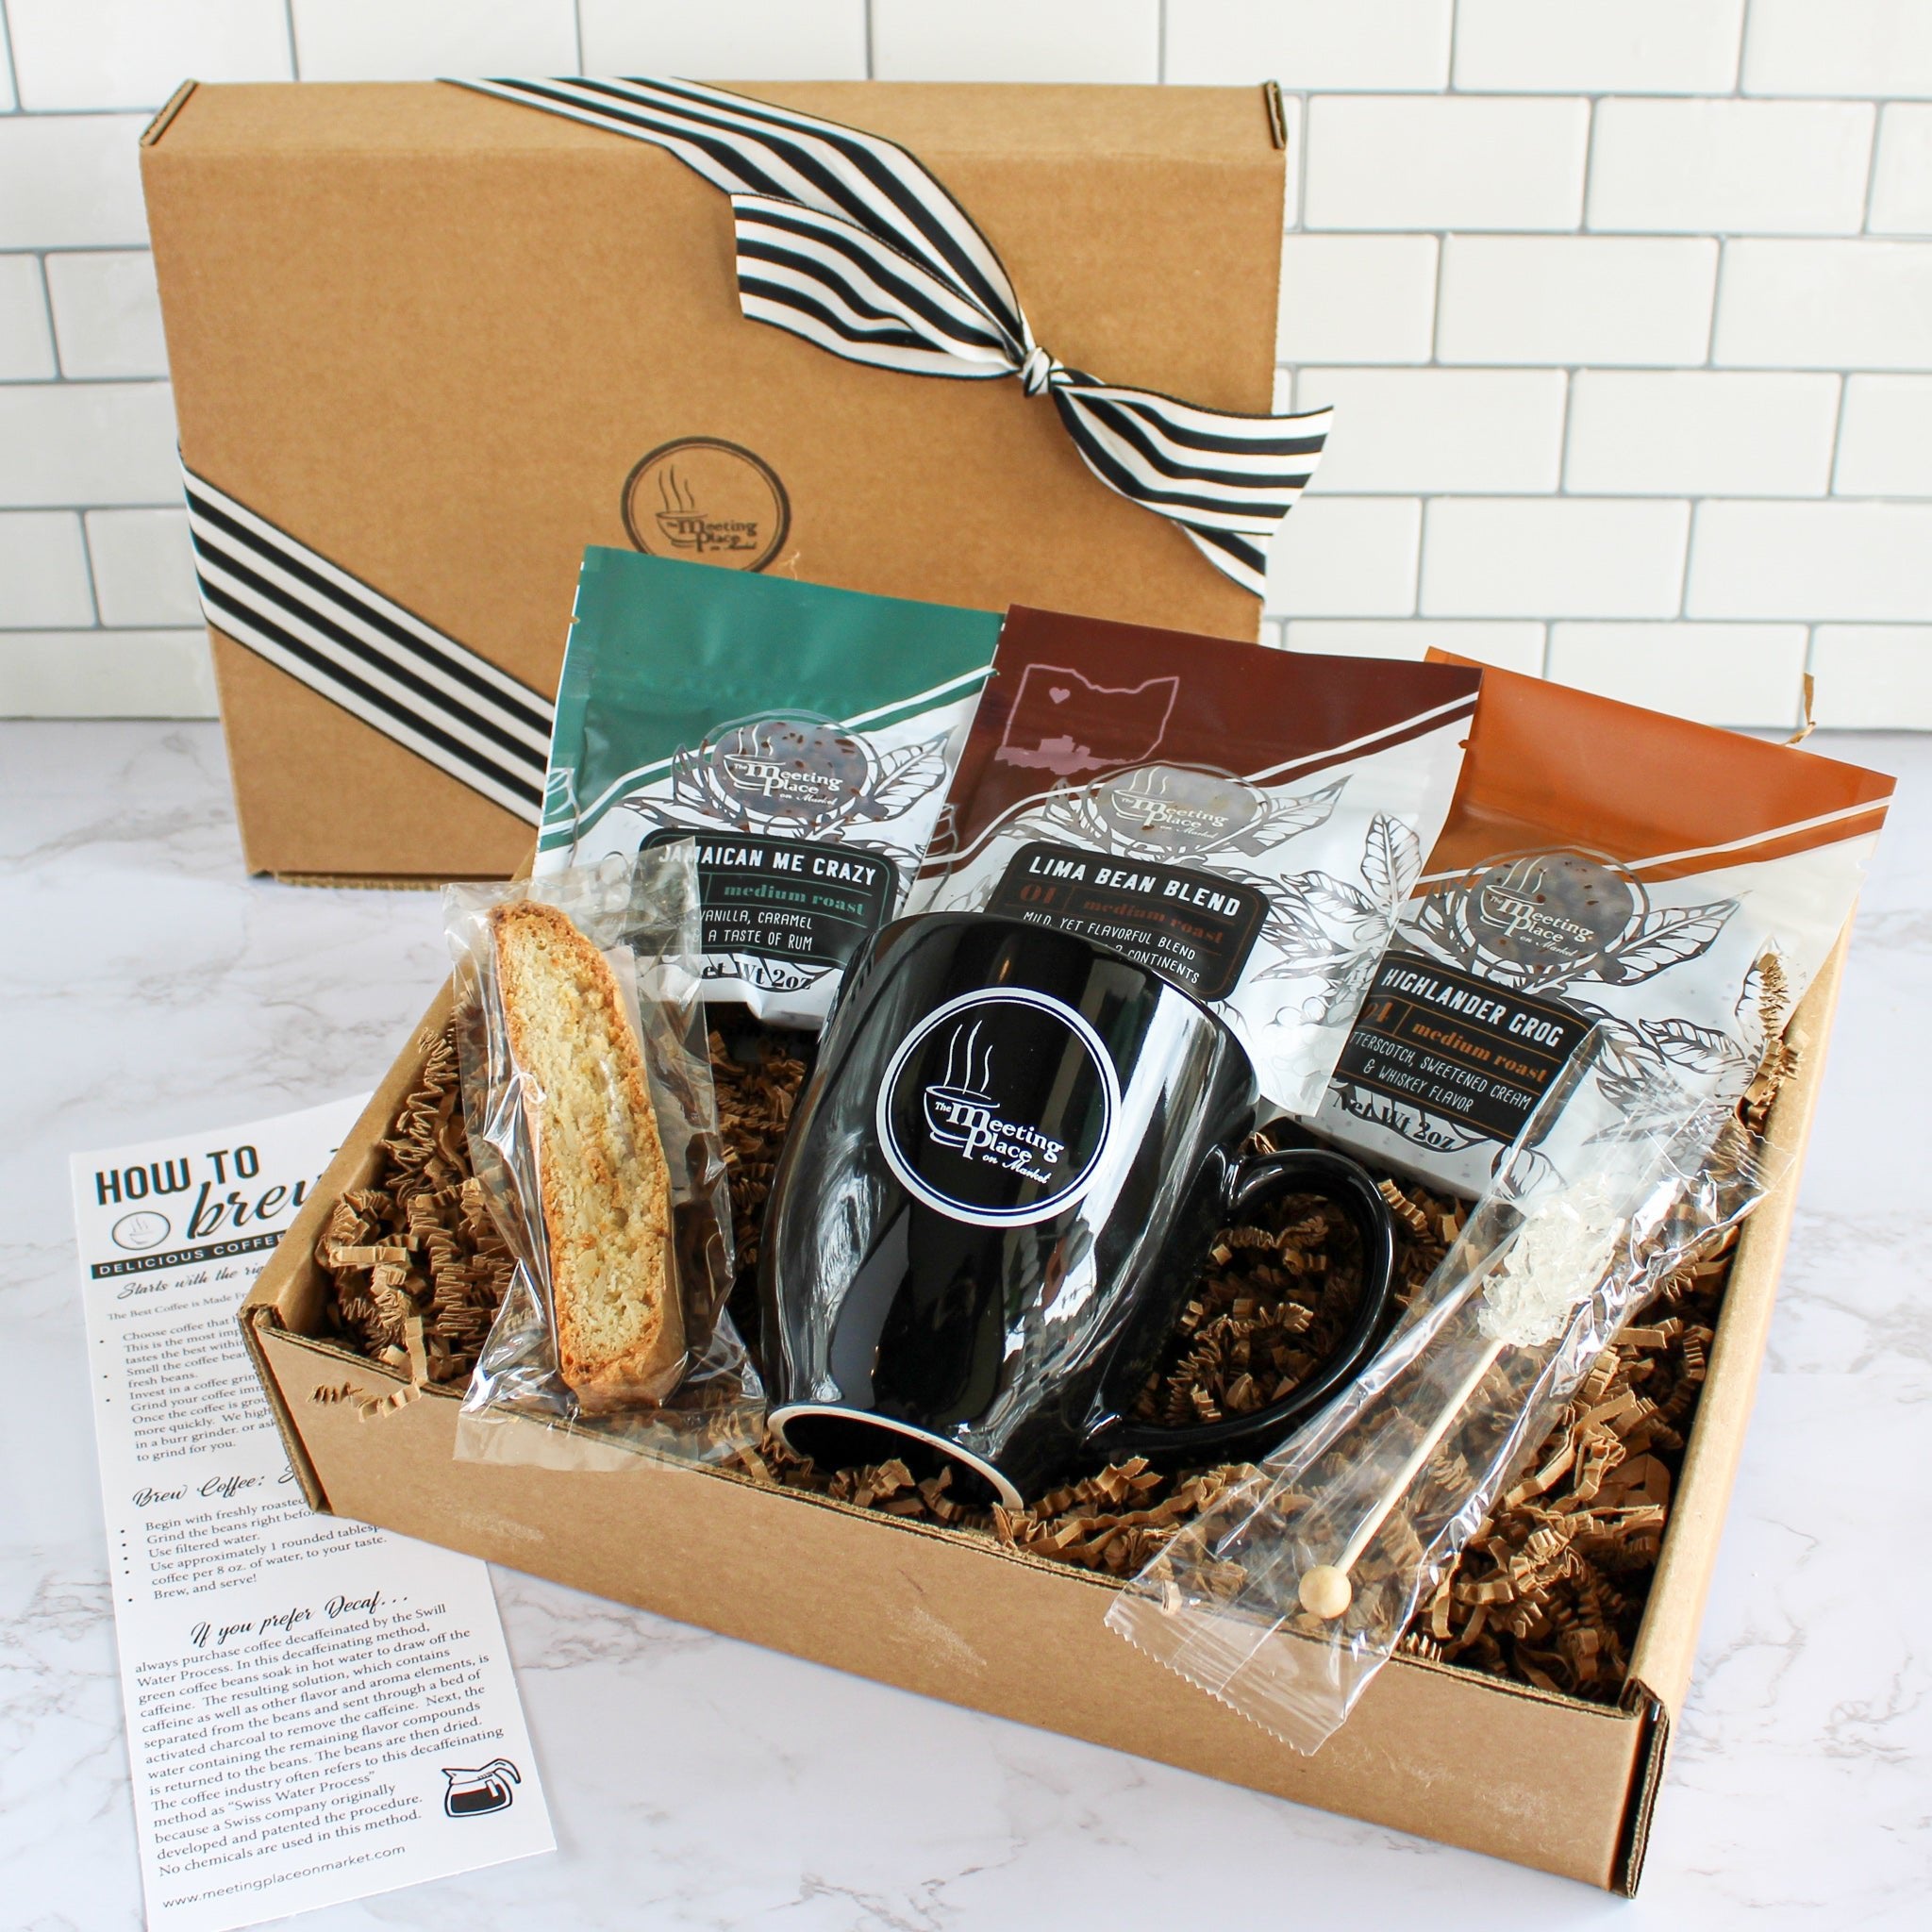 Thank You Gift Boxes  Gourmet Gift Baskets With Coffee and Baked Goods –  The Meeting Place on Market